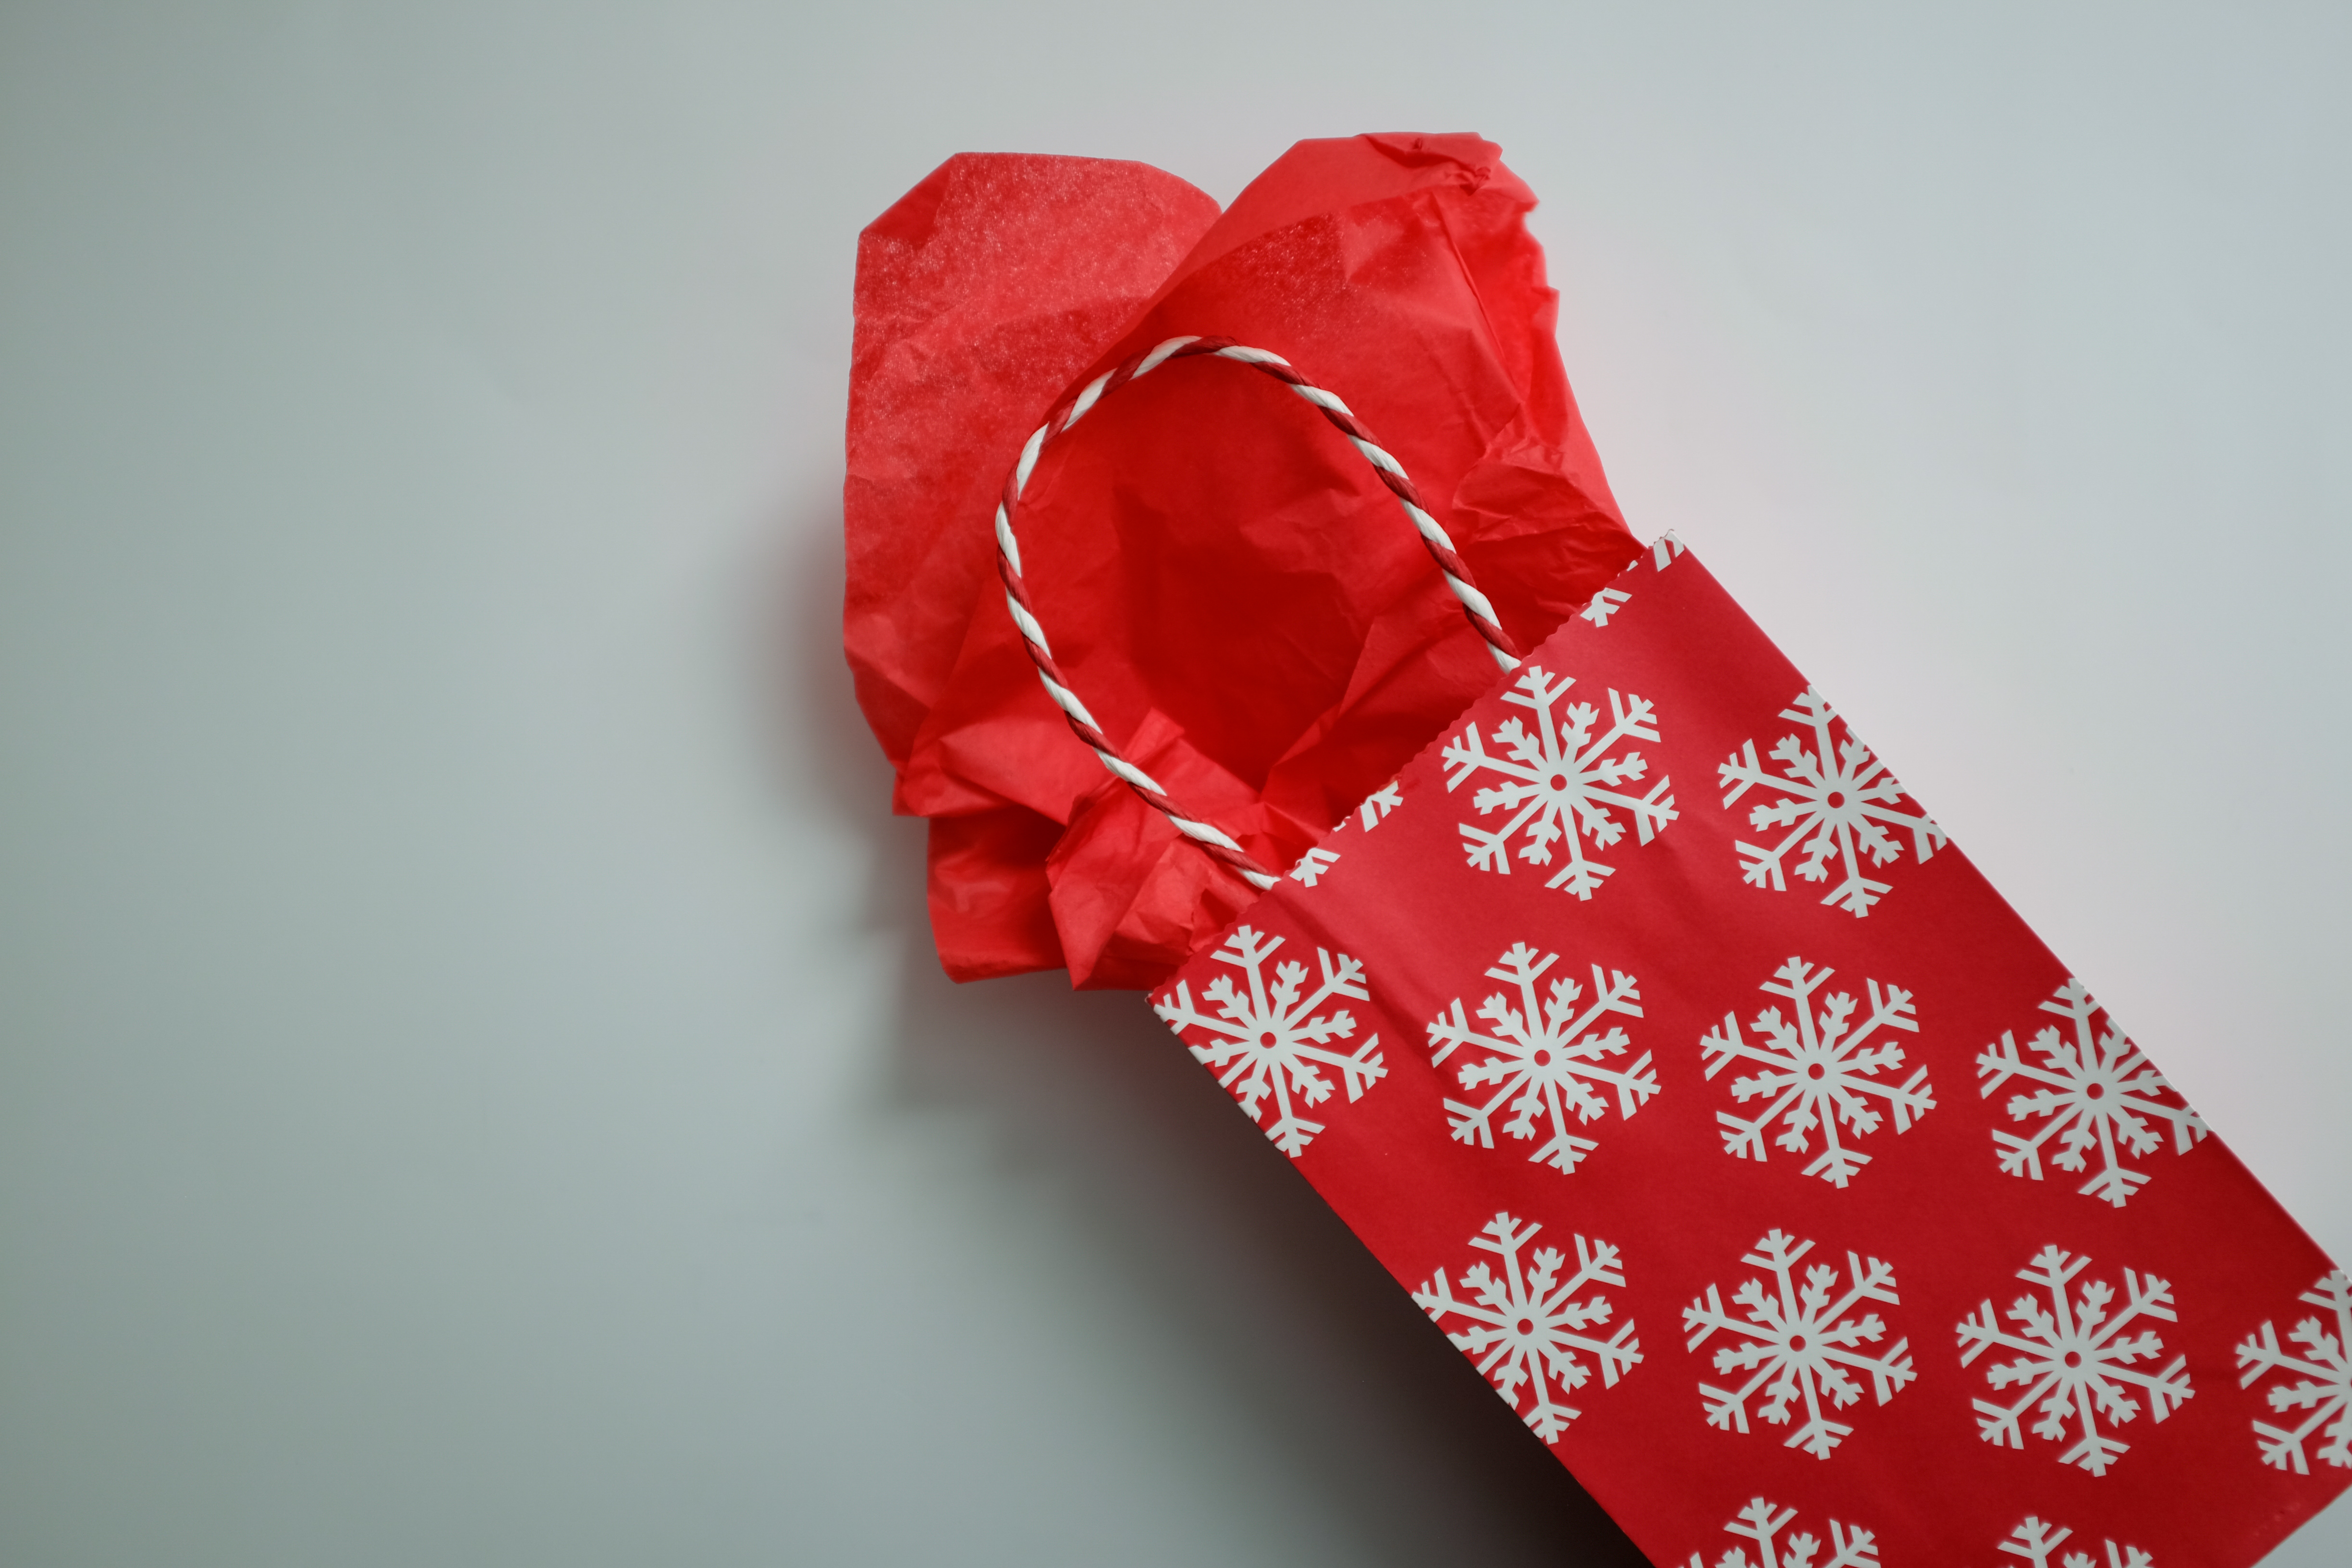 A red gift bag with white snowflakes